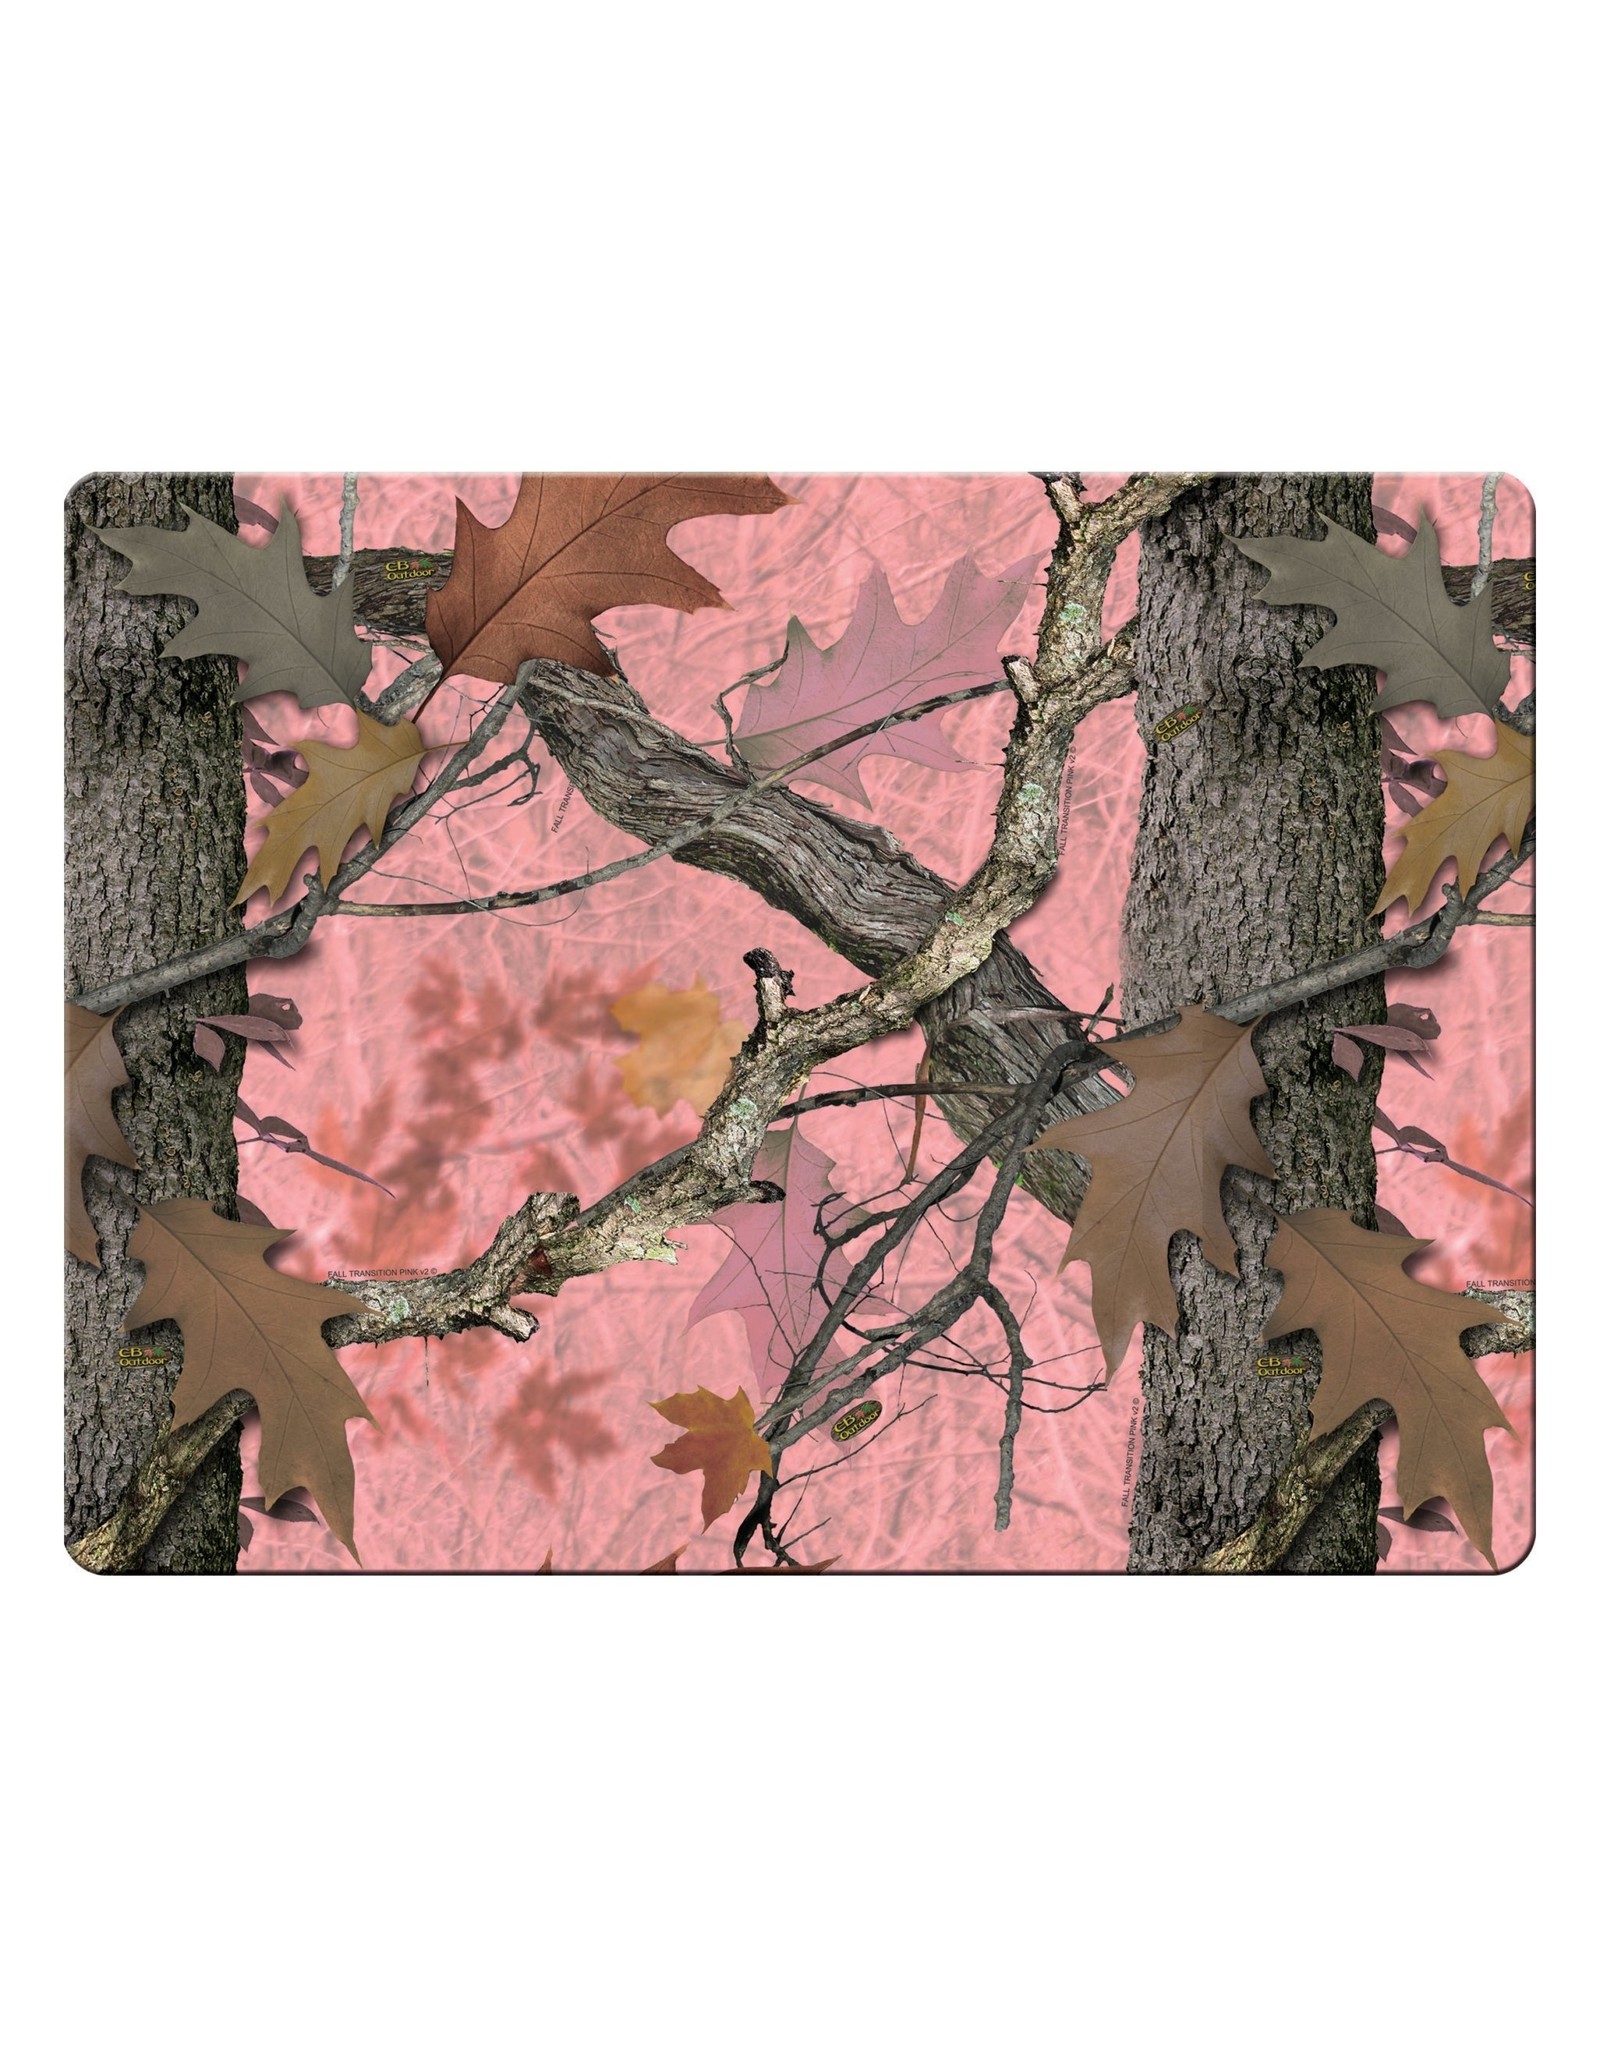 Rivers Edge Products Cutting Board 12in x 16in - Pink Camo